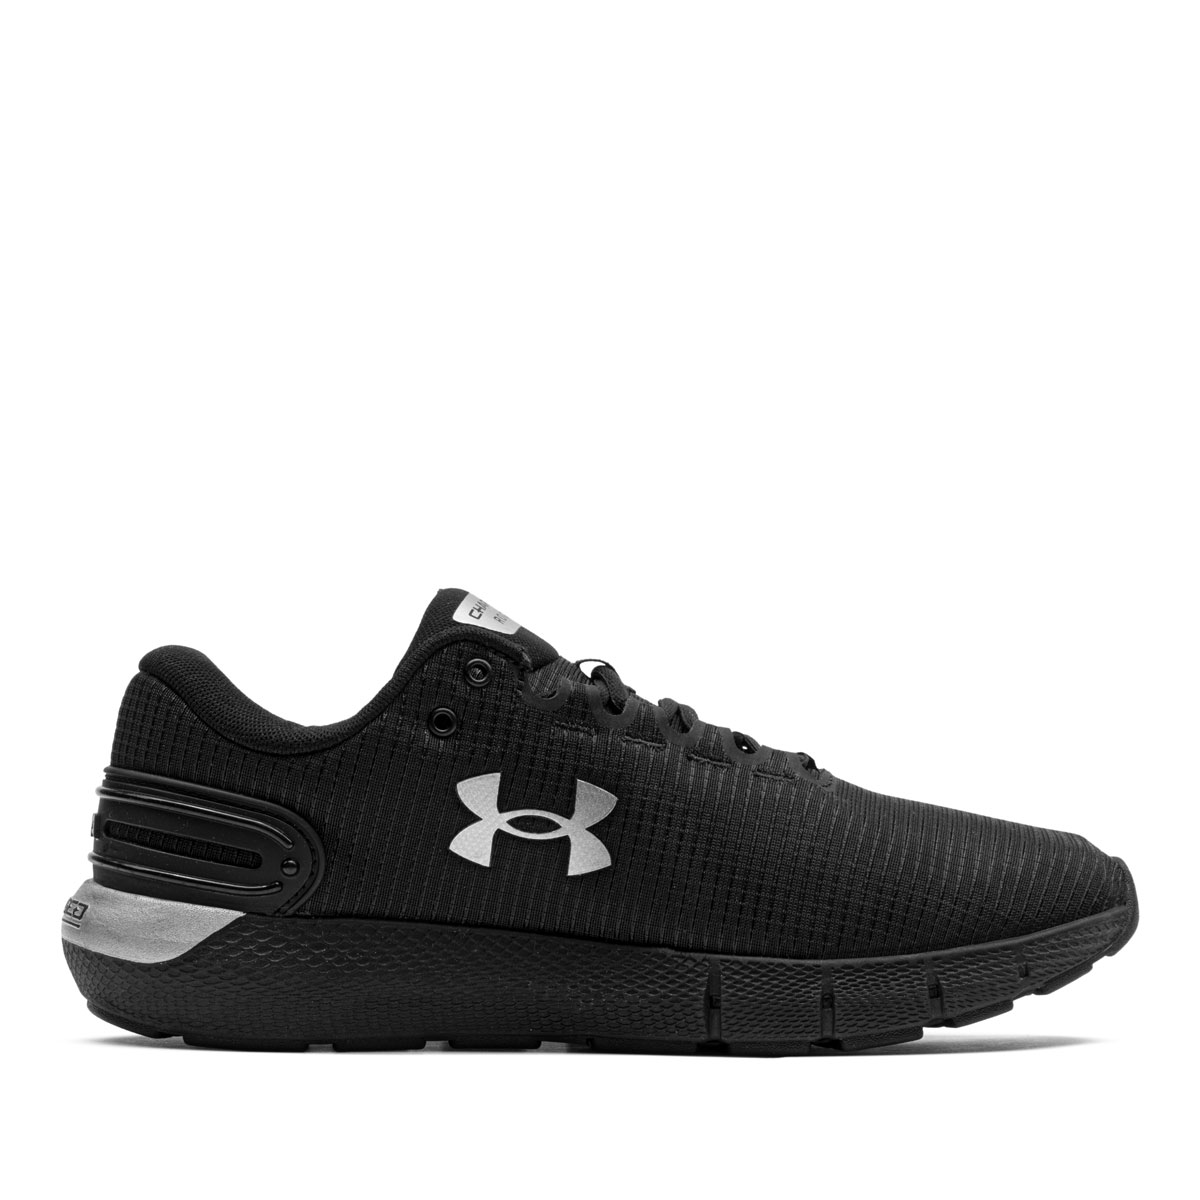 Under Armour Charged Rogue 2.5 Storm  3025250-001